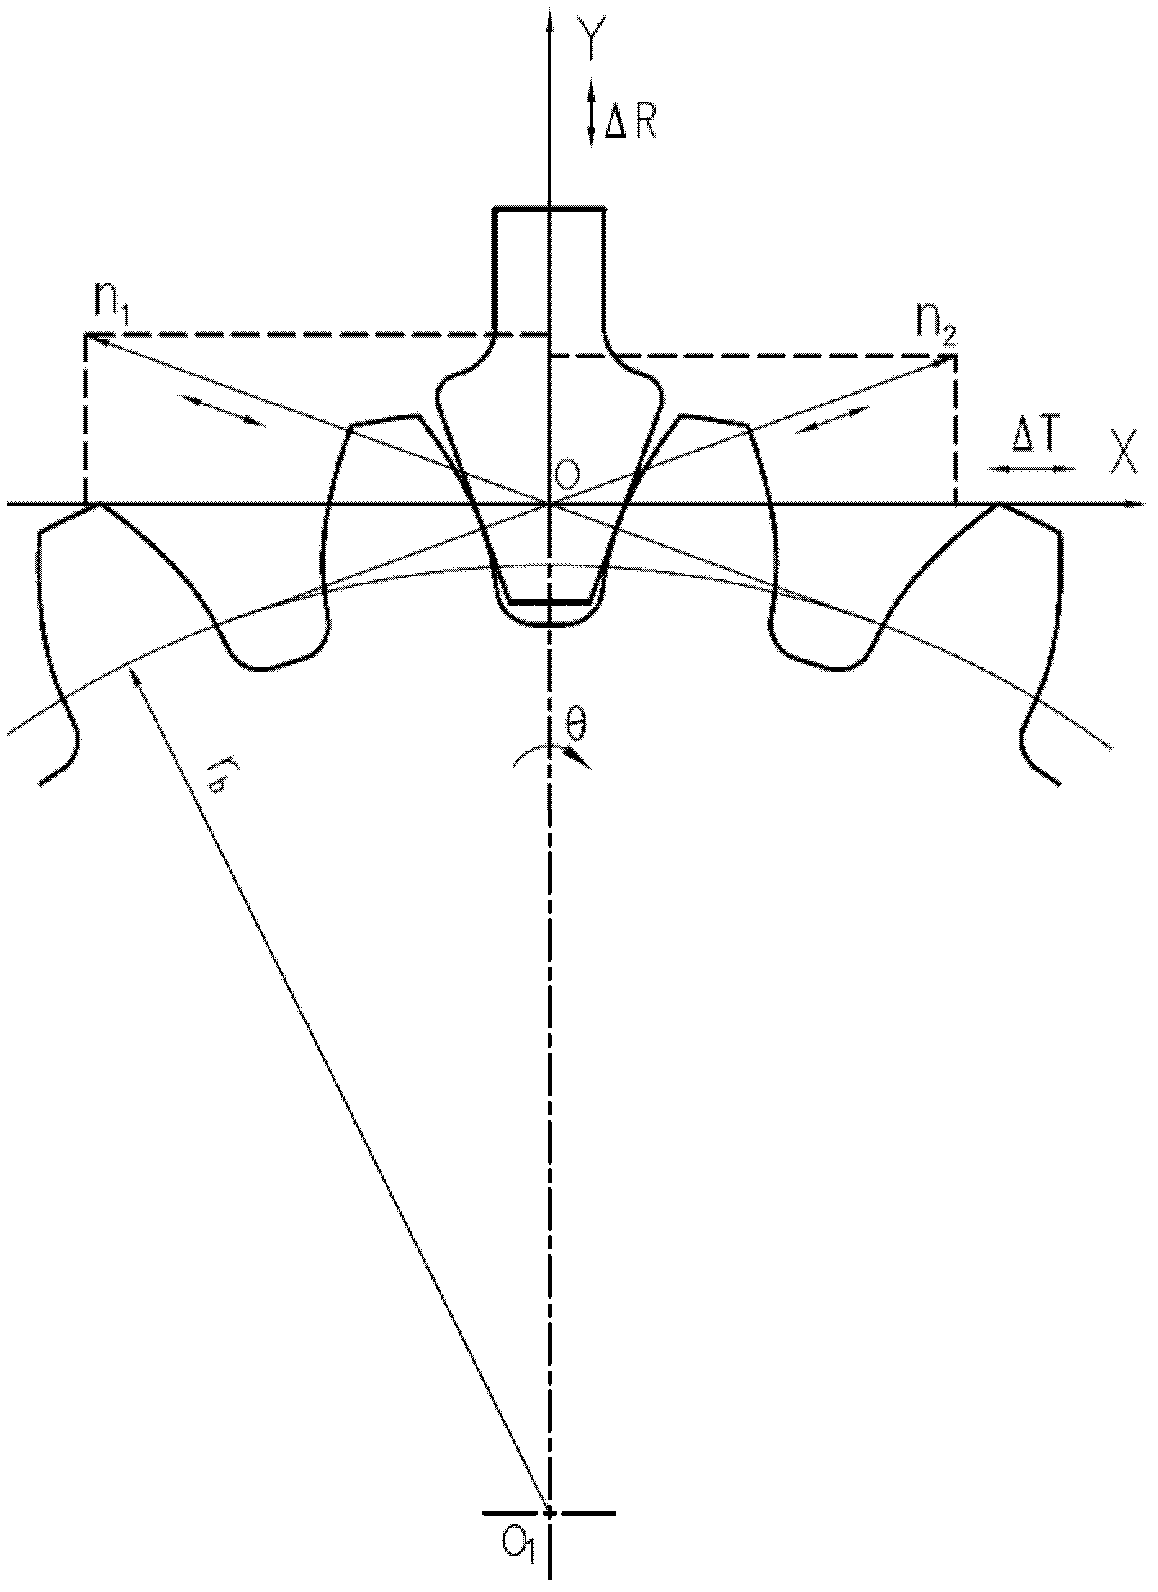 Method for measuring tooth profile deviation of gear based on double-side meshing